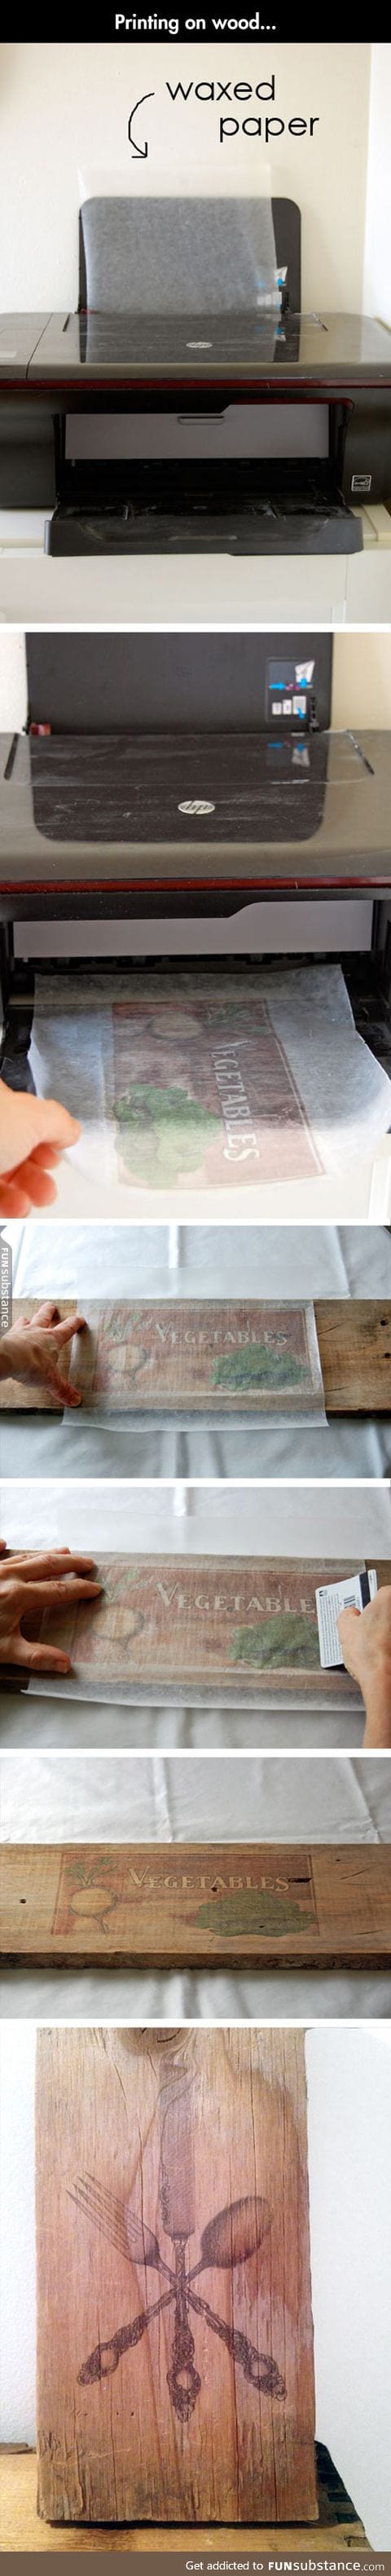 How to print on wood